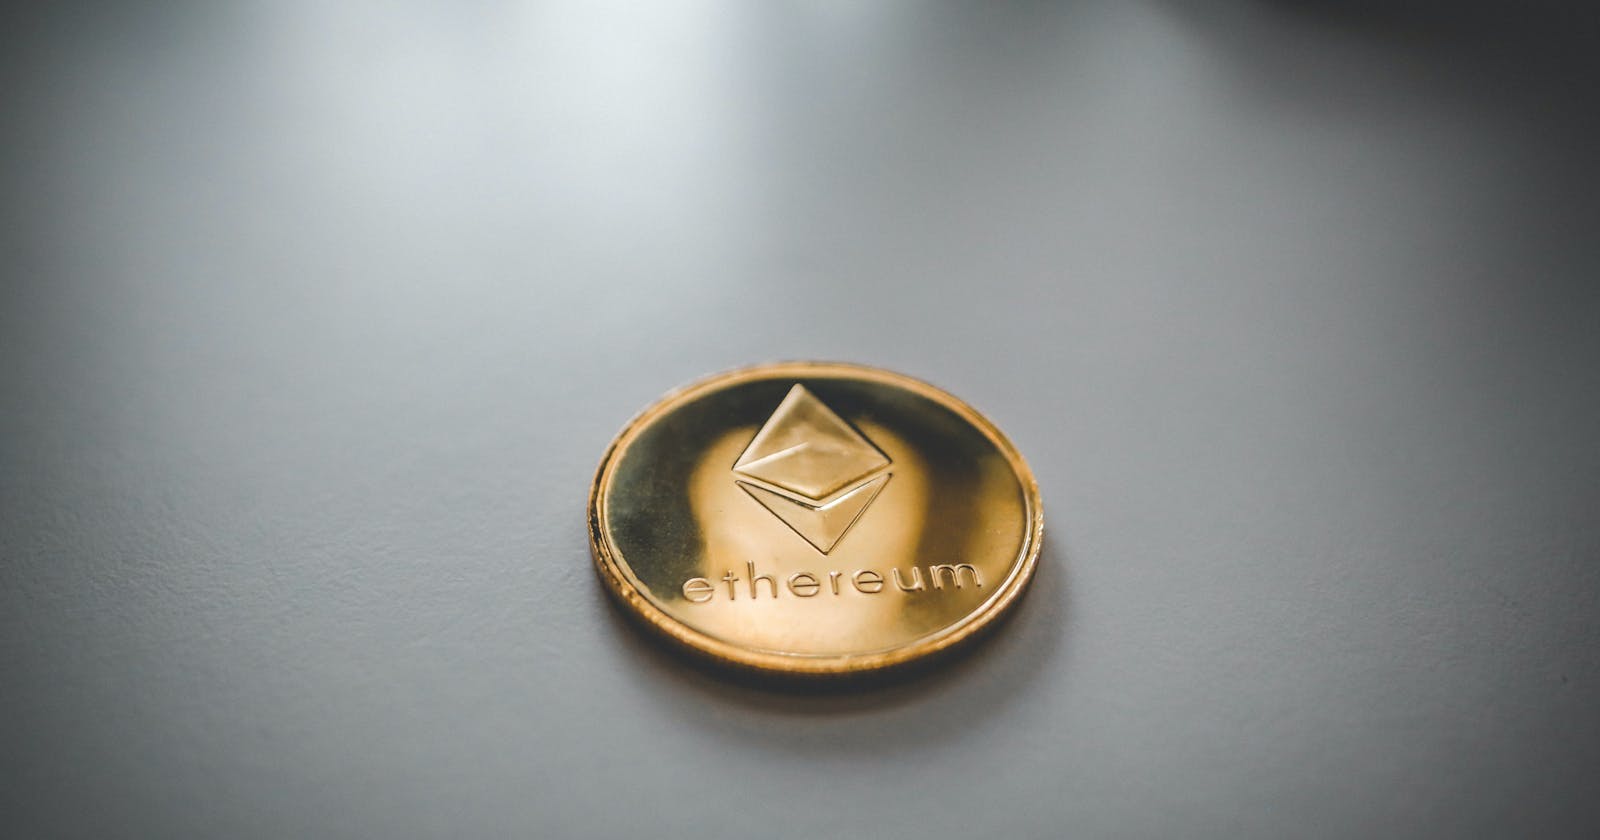 Staking your ETH to become an Ethereum validator